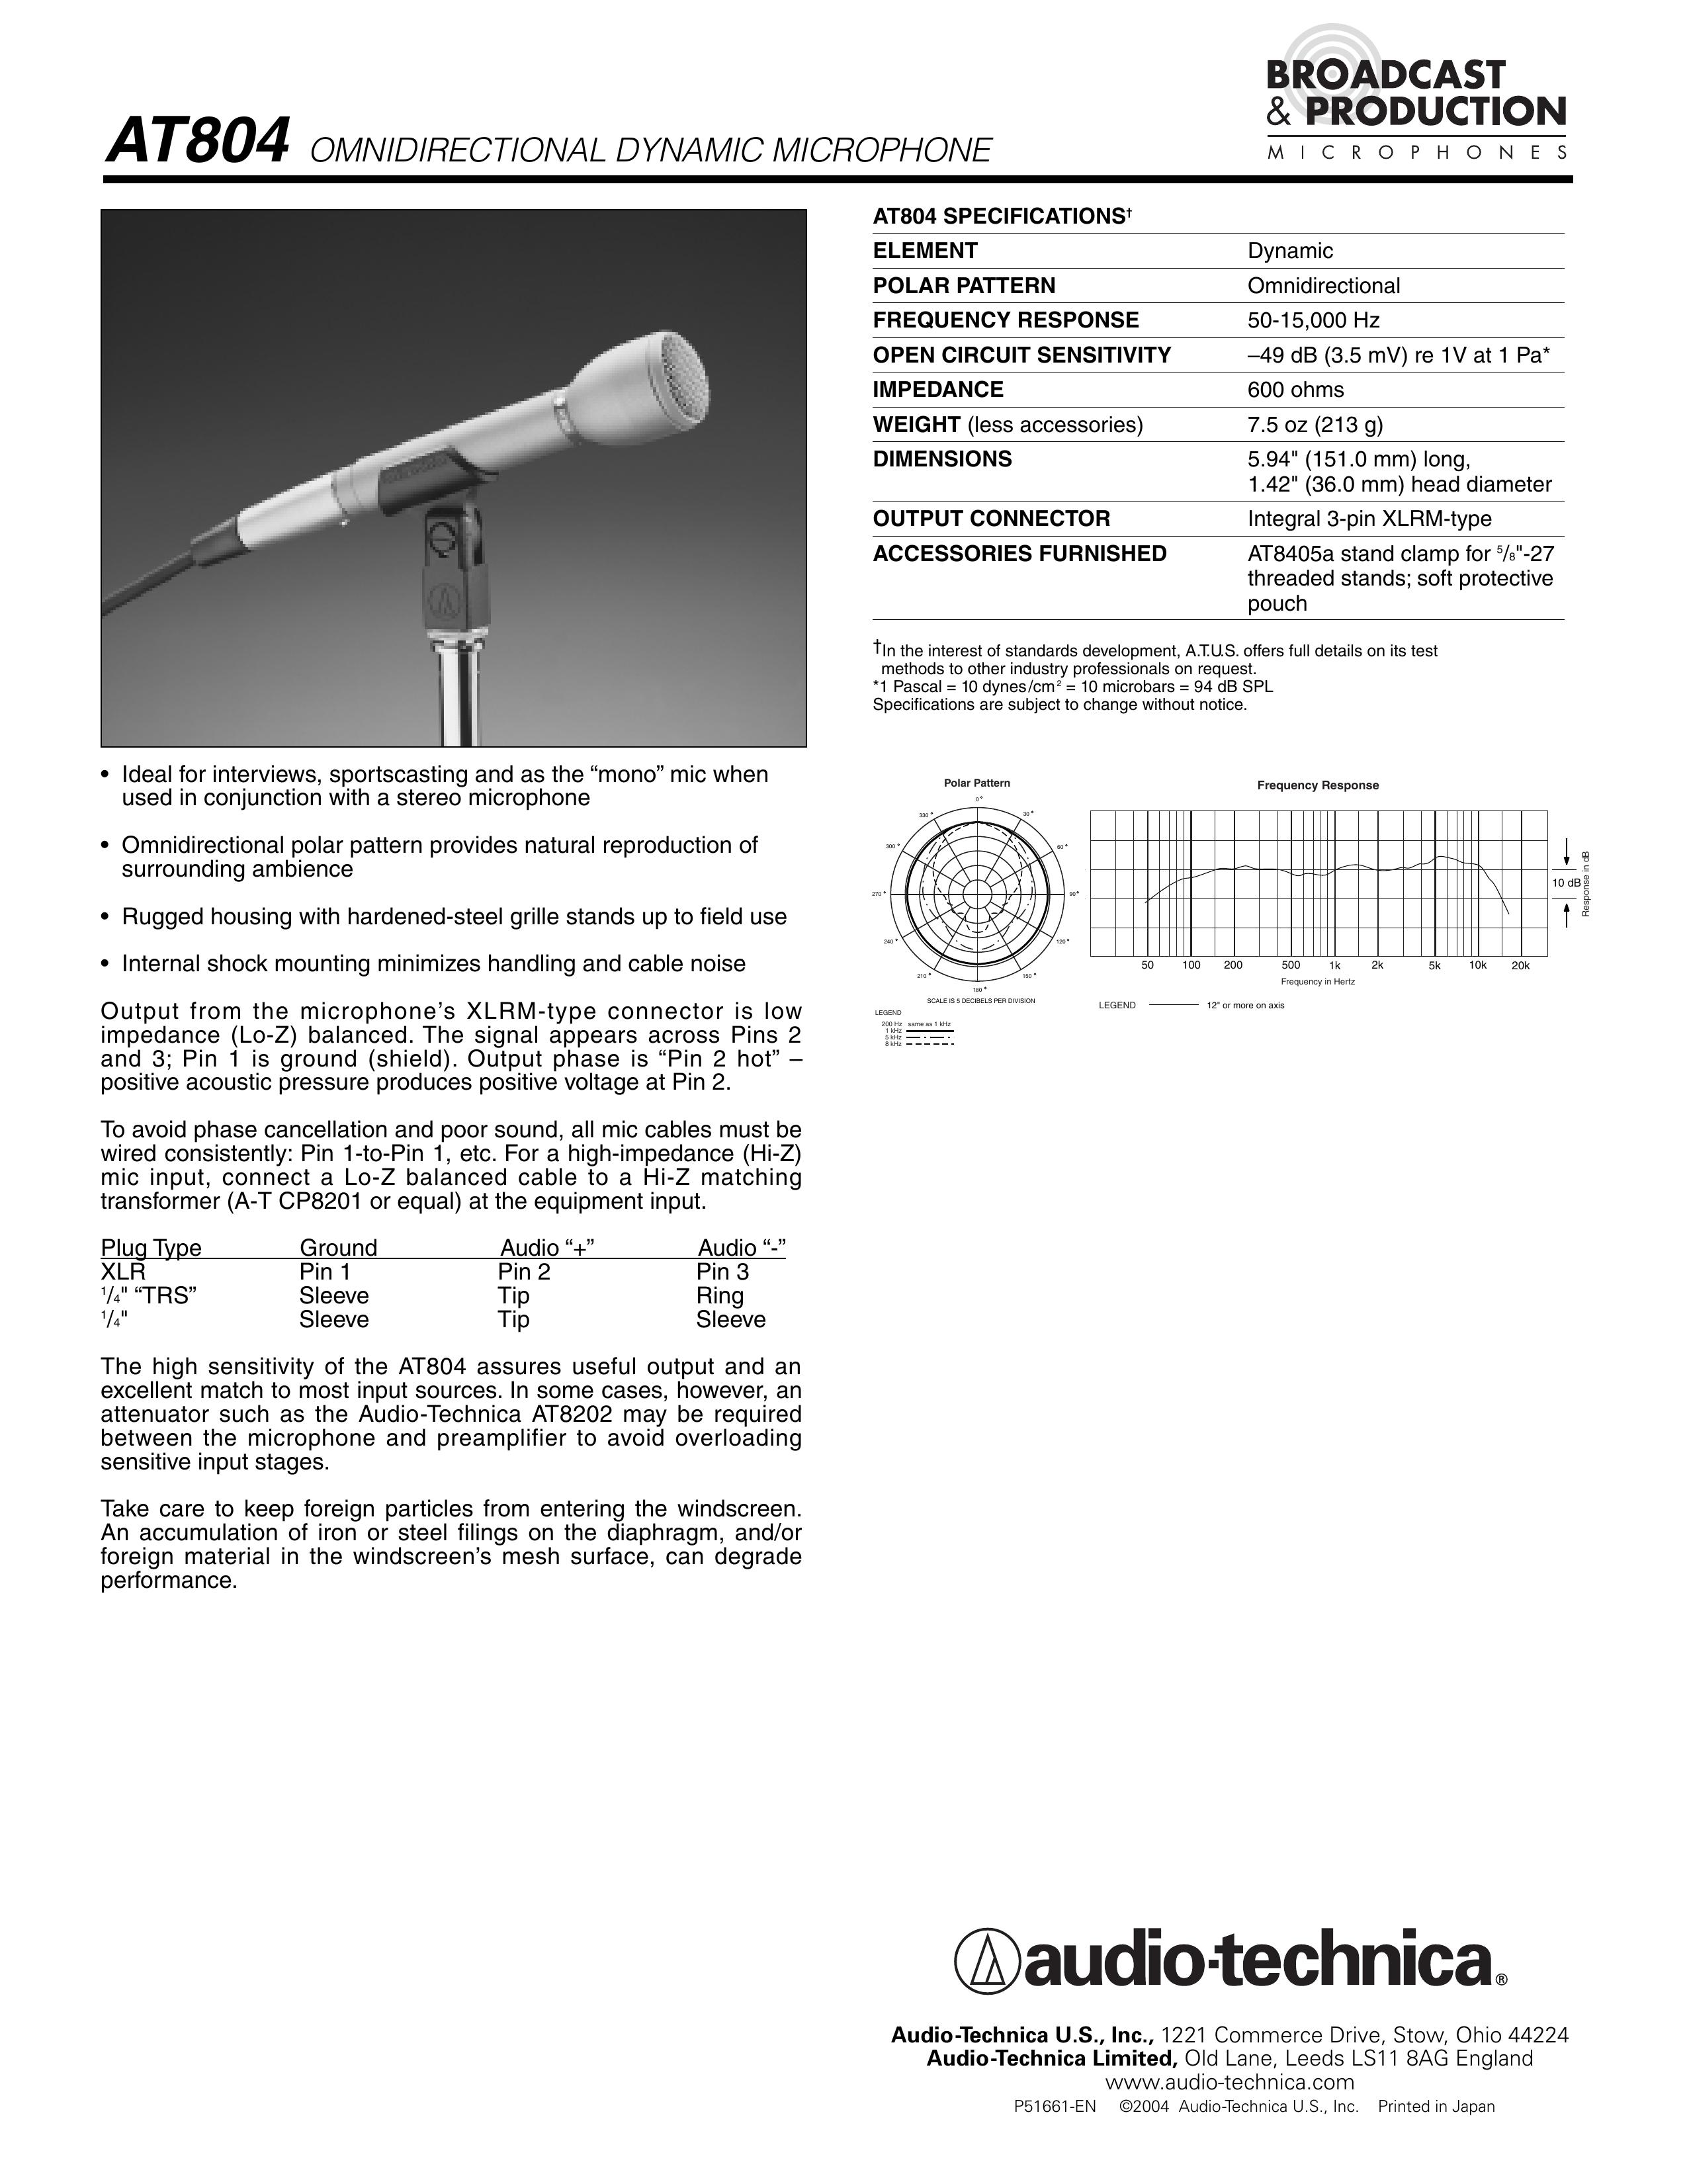 Audio-Technica AT804 Microphone User Manual